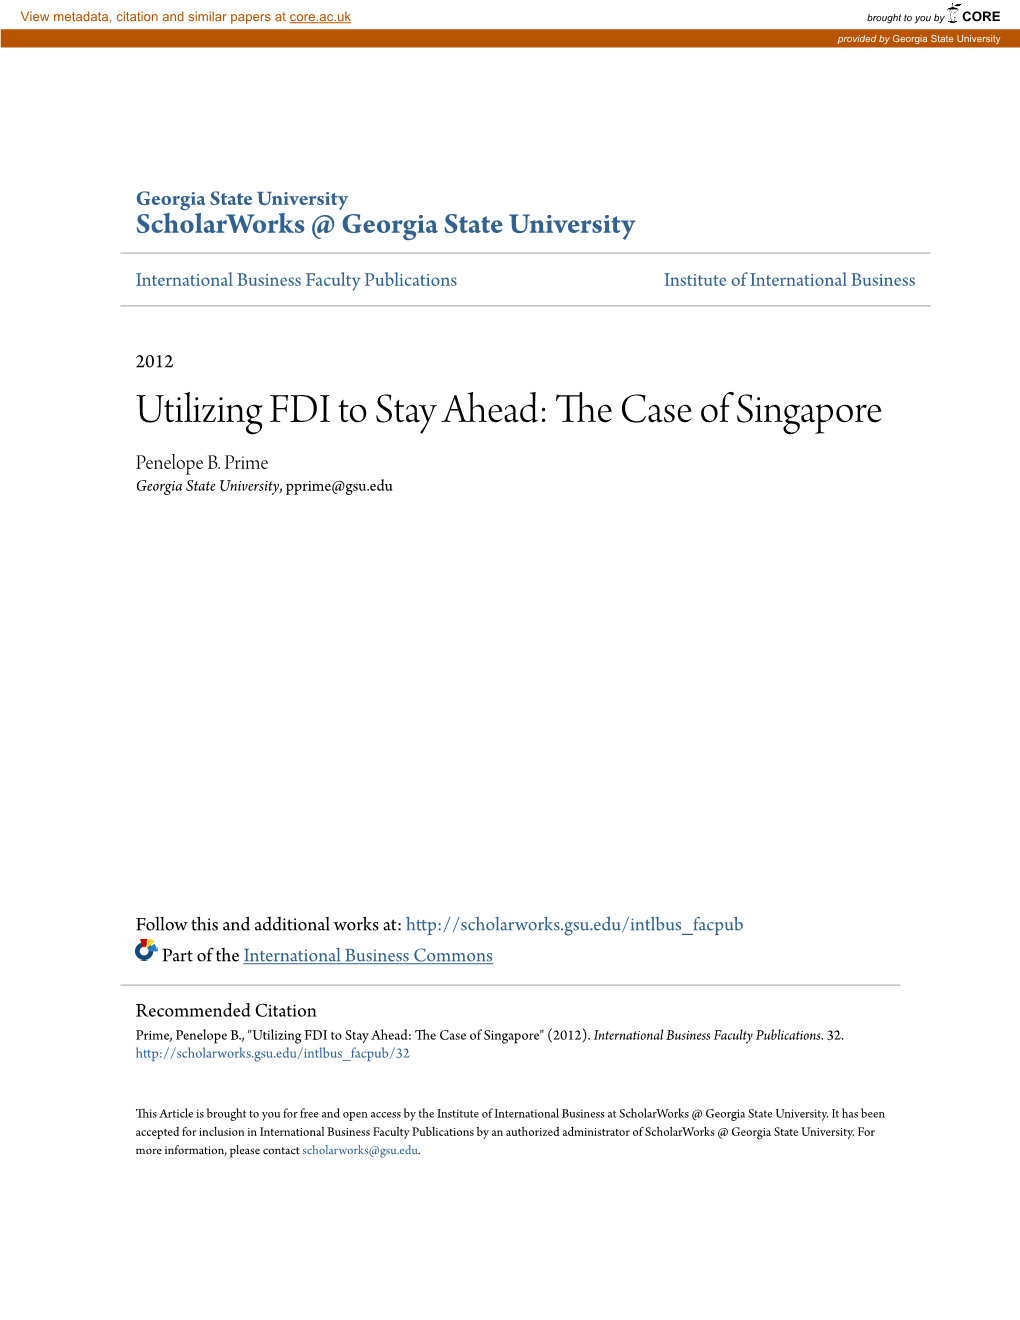 Utilizing FDI to Stay Ahead: the Case of Singapore Penelope B